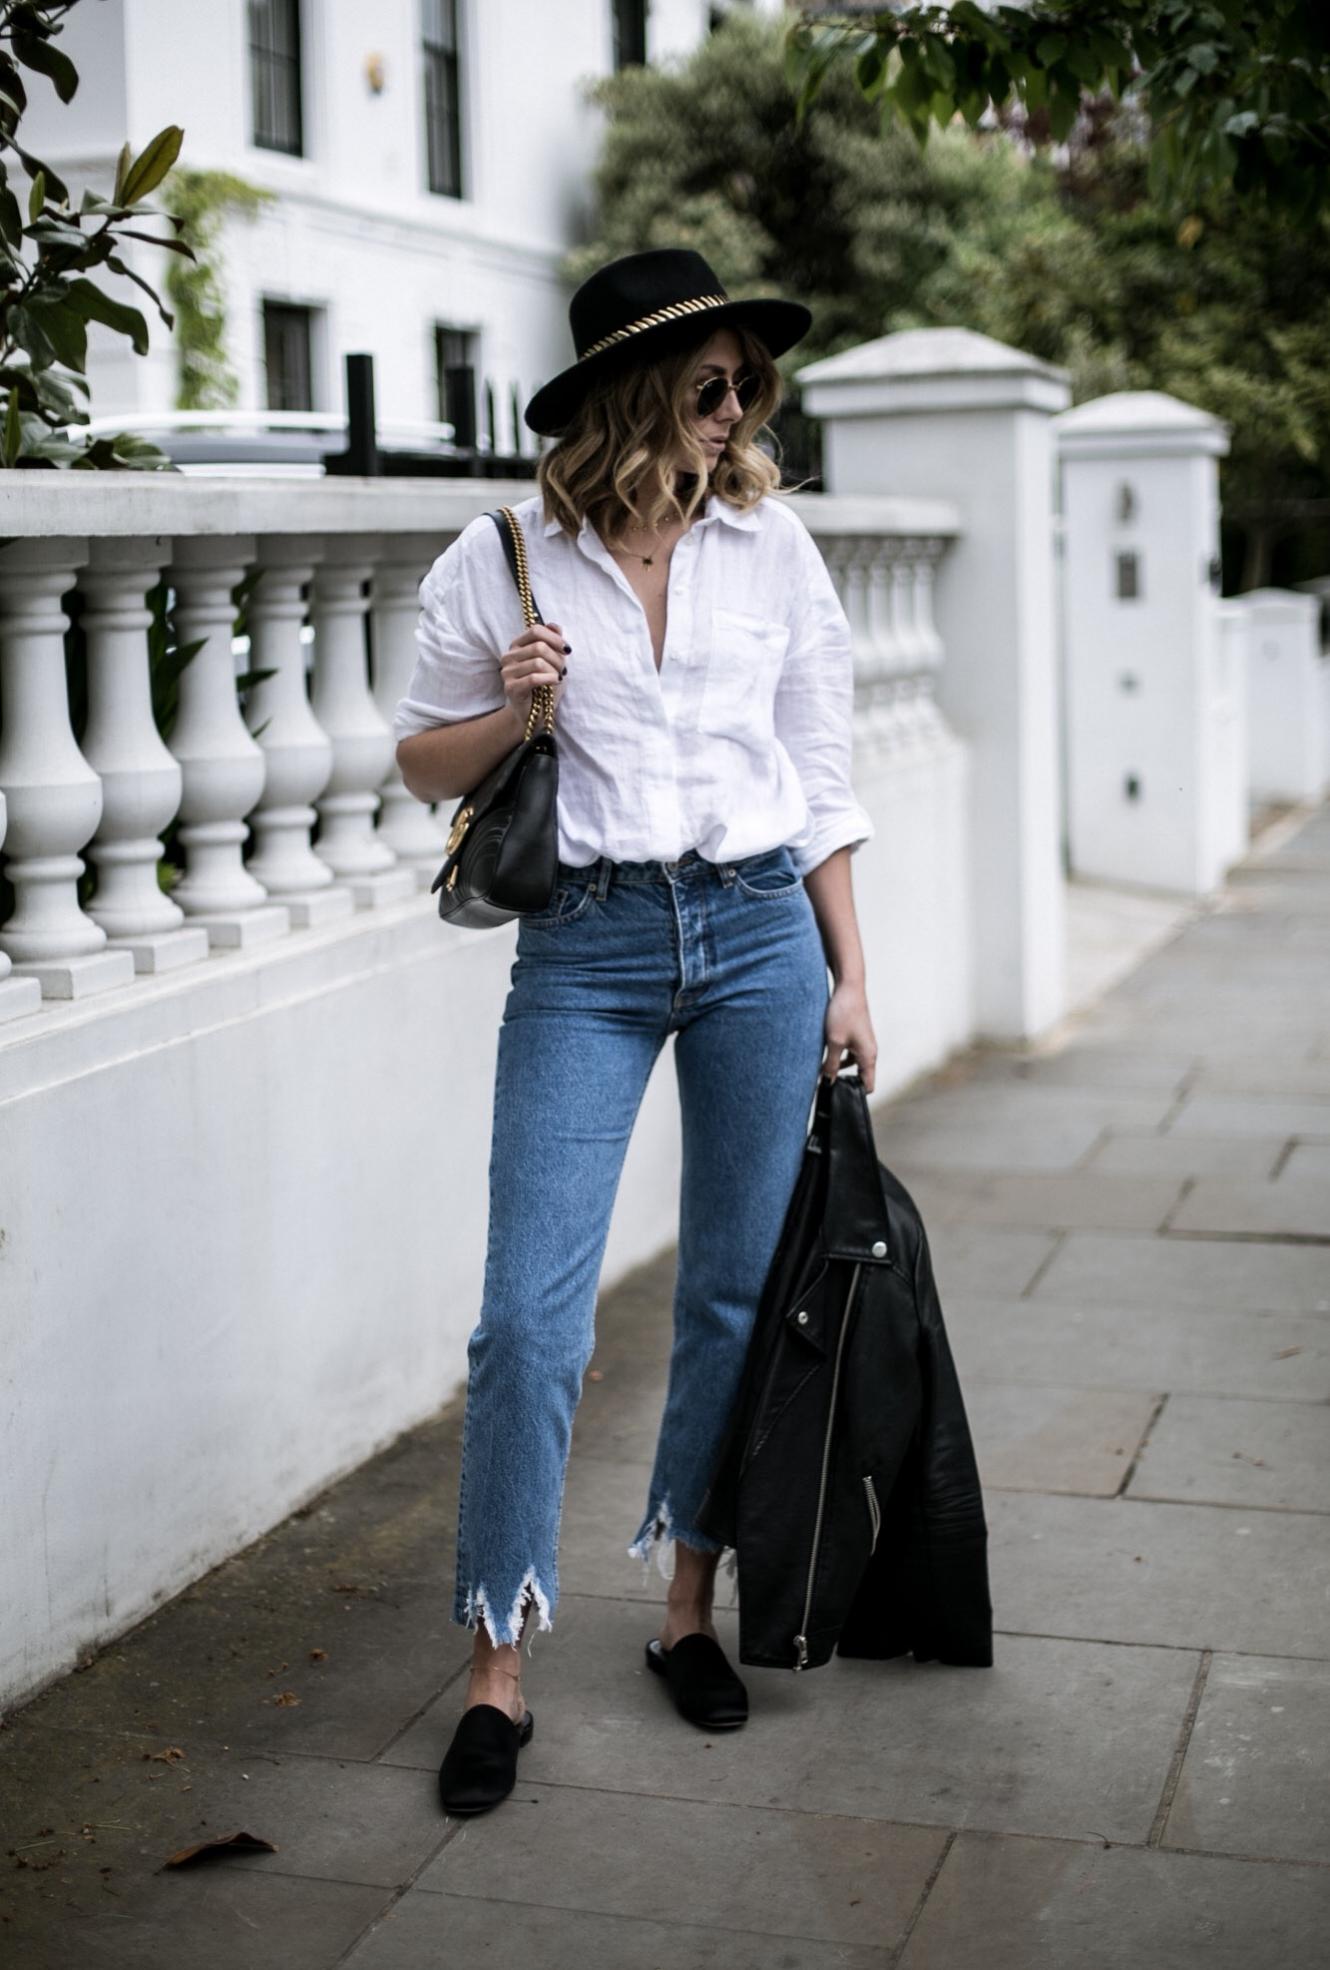 Emma Hill of EJSTYLE wears white linen shirt, distressed hem jeans, black leather biker jacket, fedora with gold band, Gucci Marmont bag, satin mules, casual spring outfit